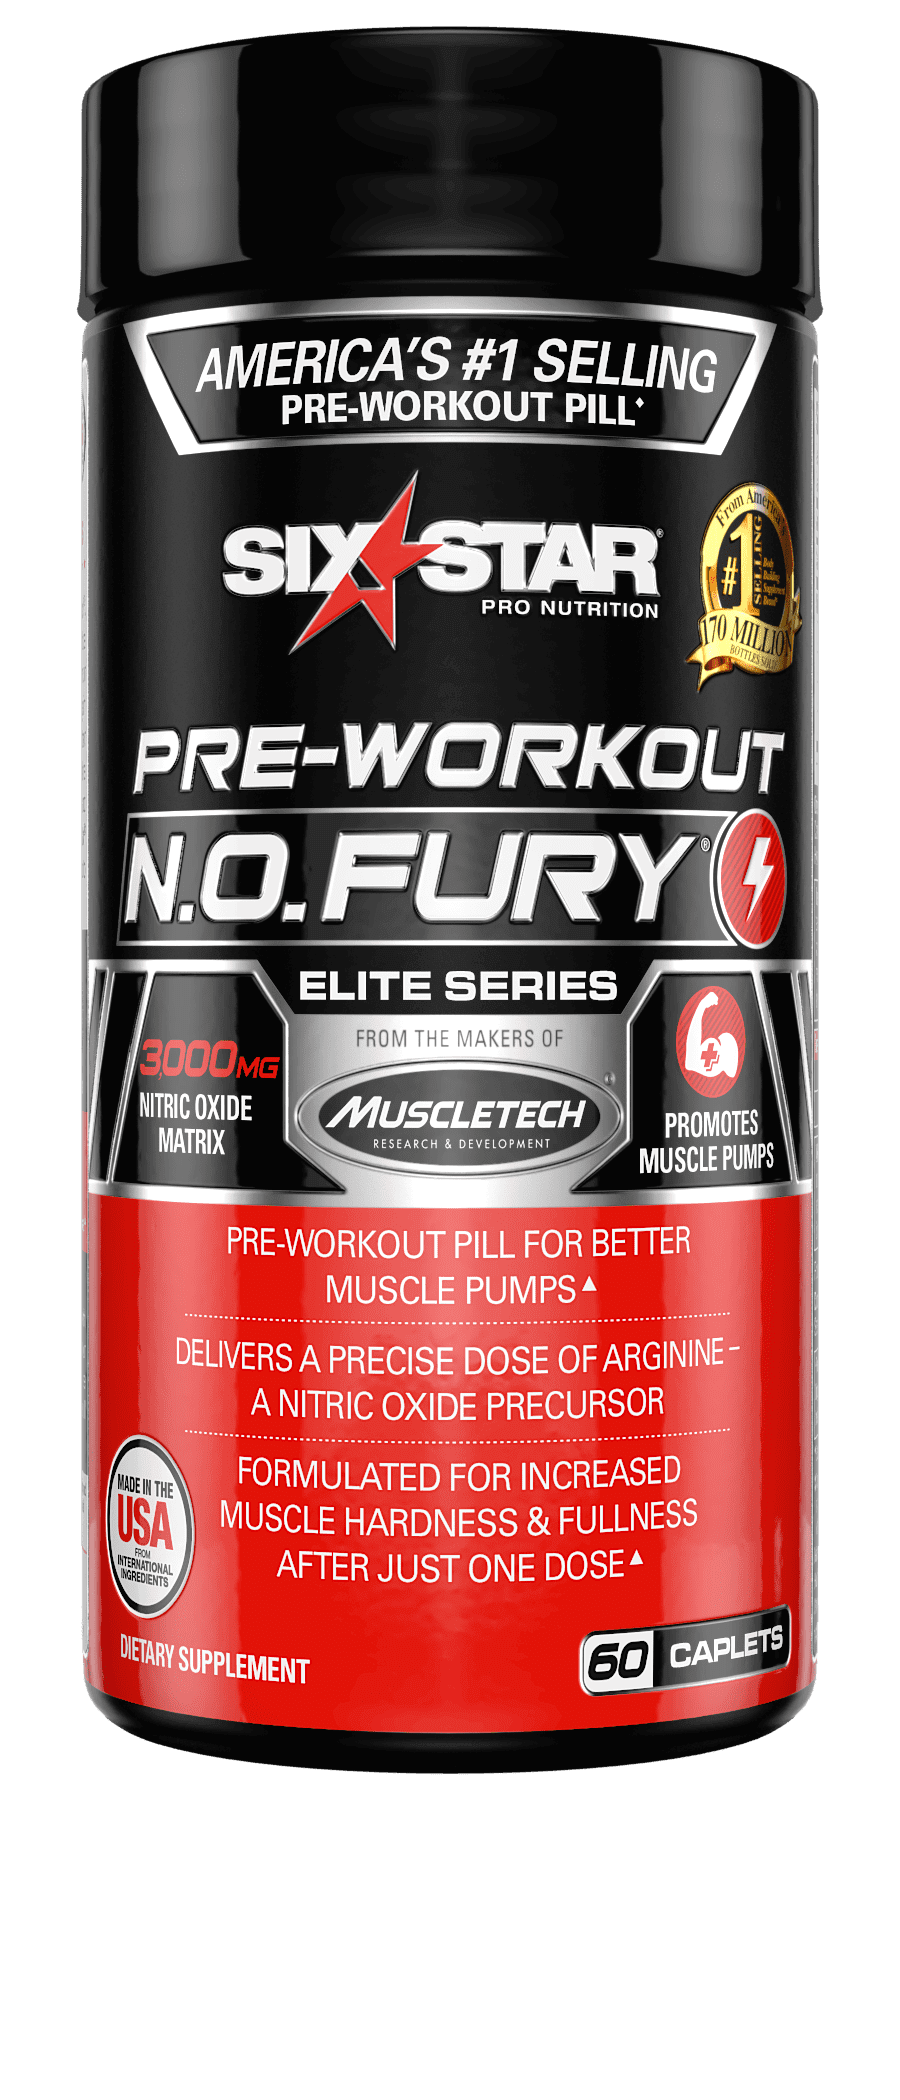 15 Minute Fury 3d pre workout for Machine